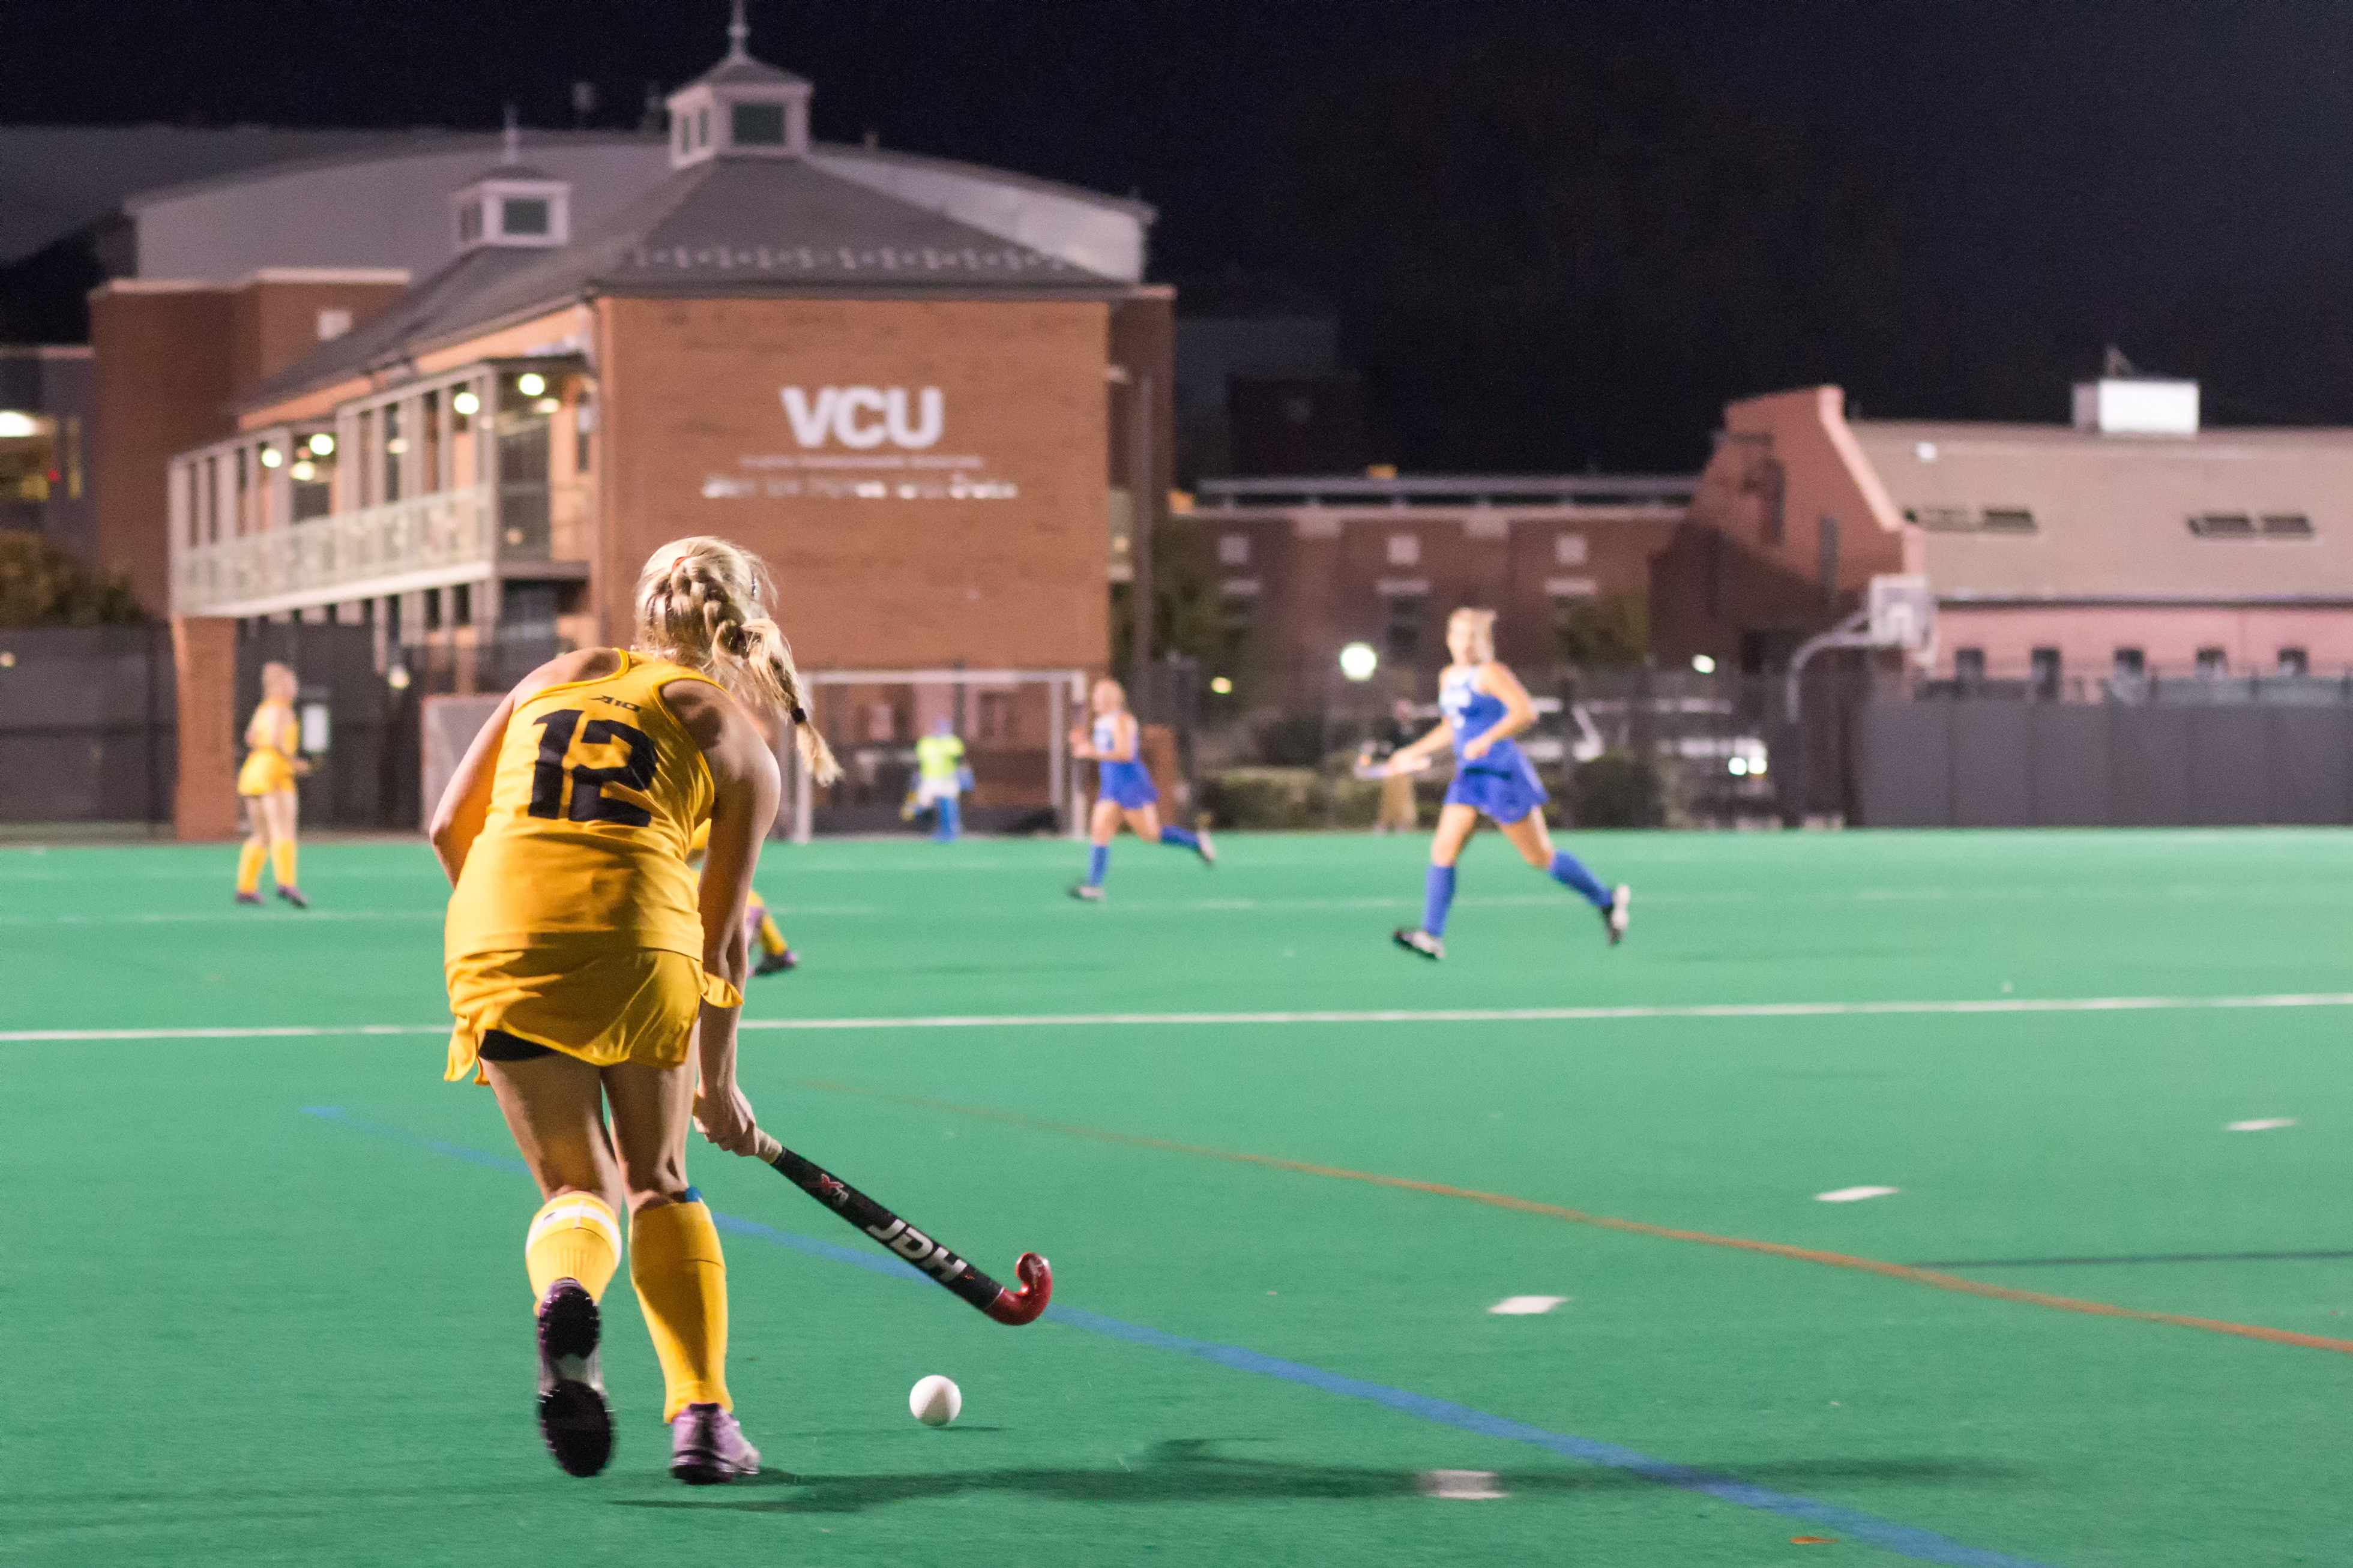 Junior defender Natalie Bohmke was selected to compete in the USA Field Hockey Young Women's National Championship this past summer. Photo by Eric Marquez.